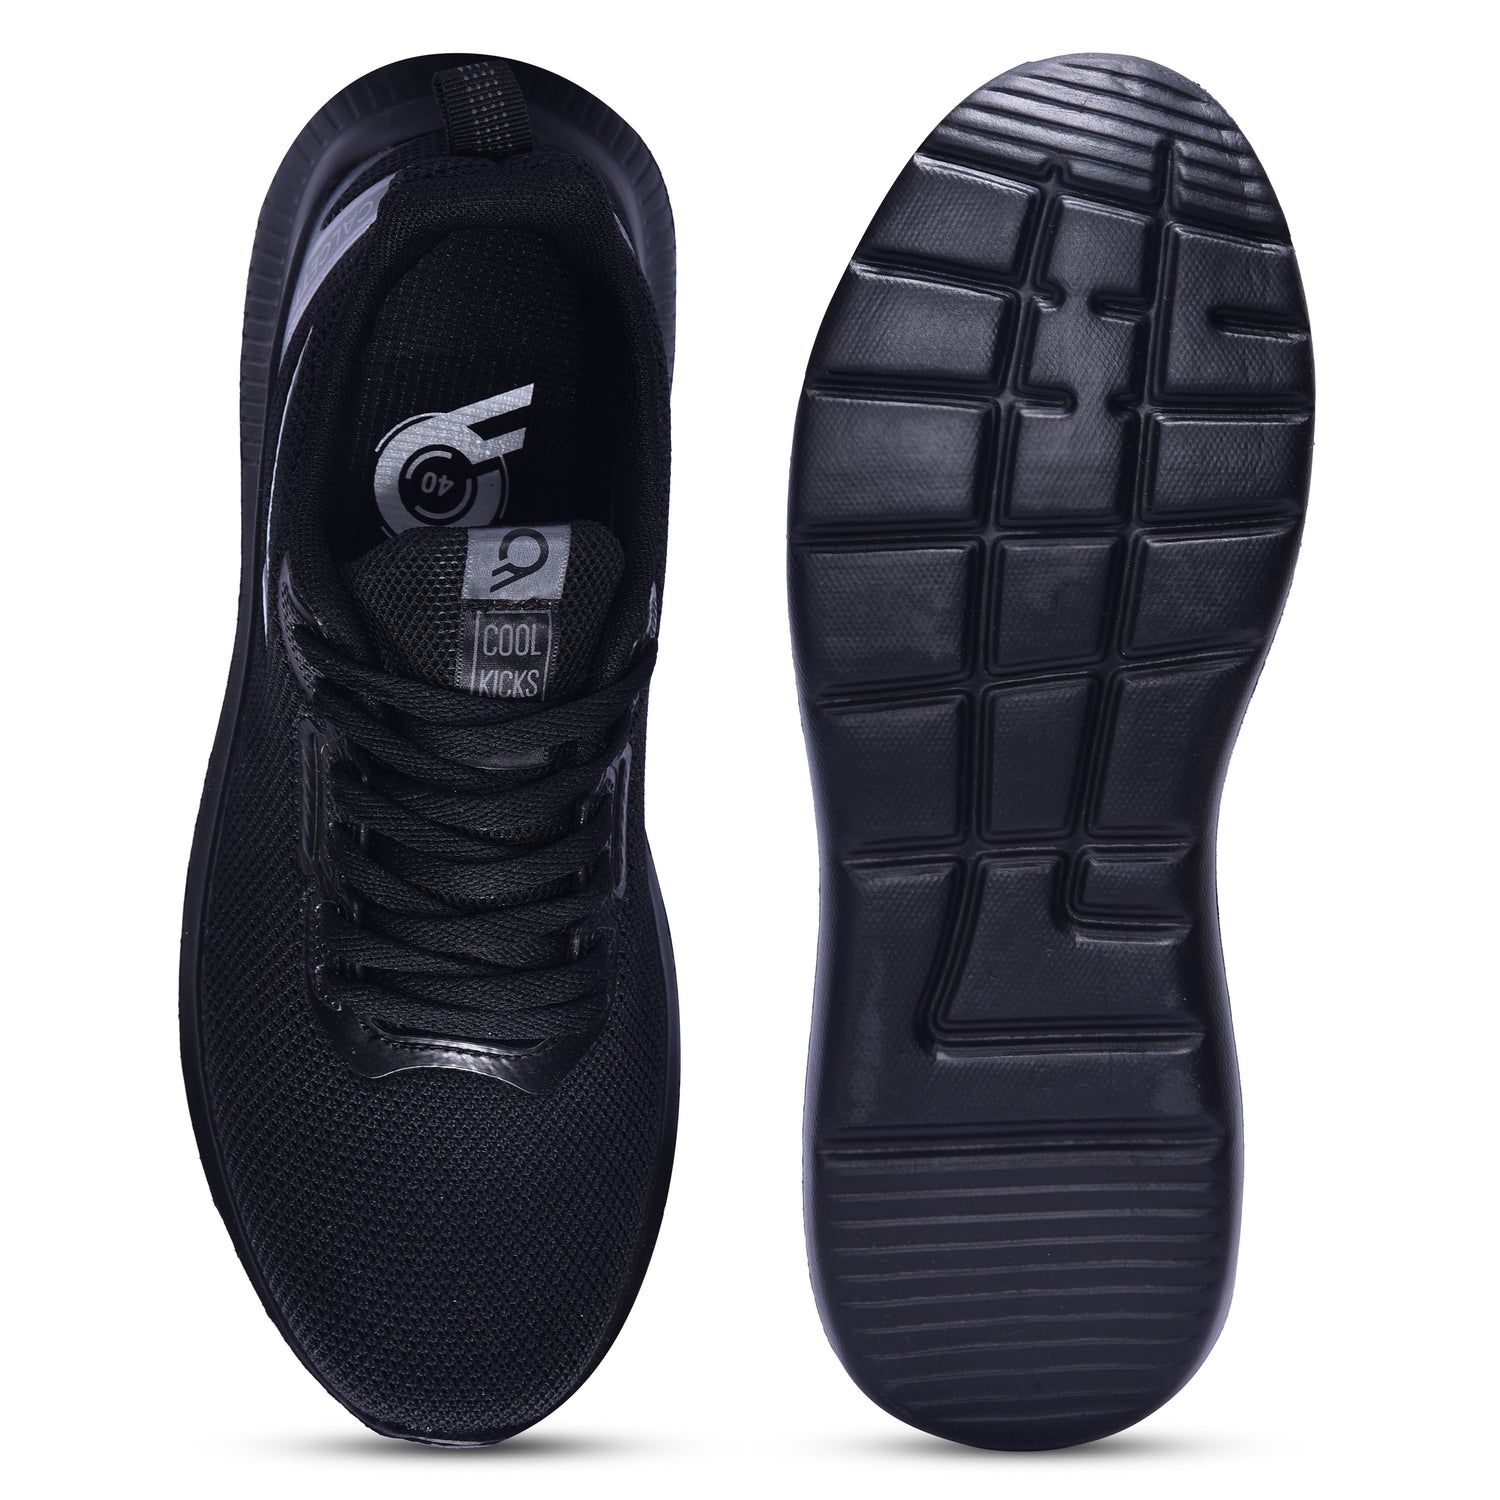 Calcetto CLT-9822 Full Black Women Casual Shoes